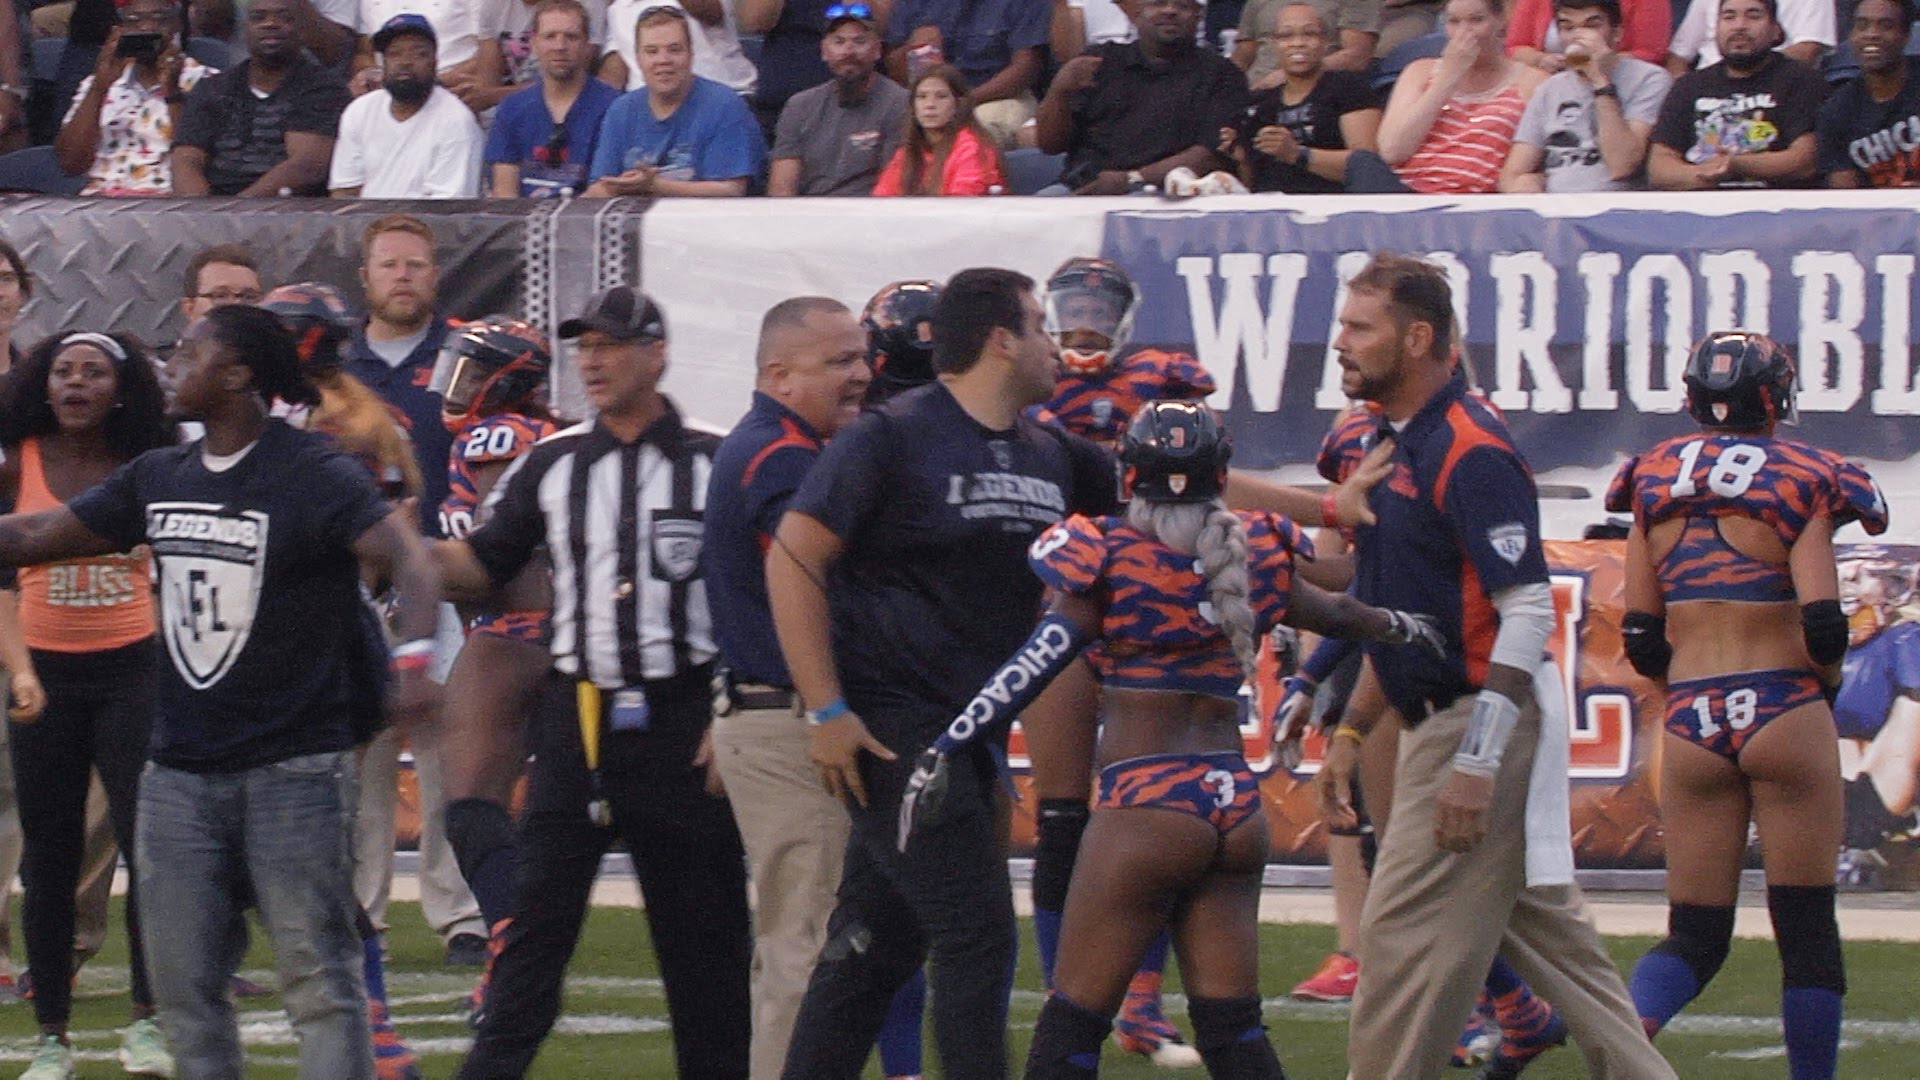 LFL Coach gets punched in the face during scrum